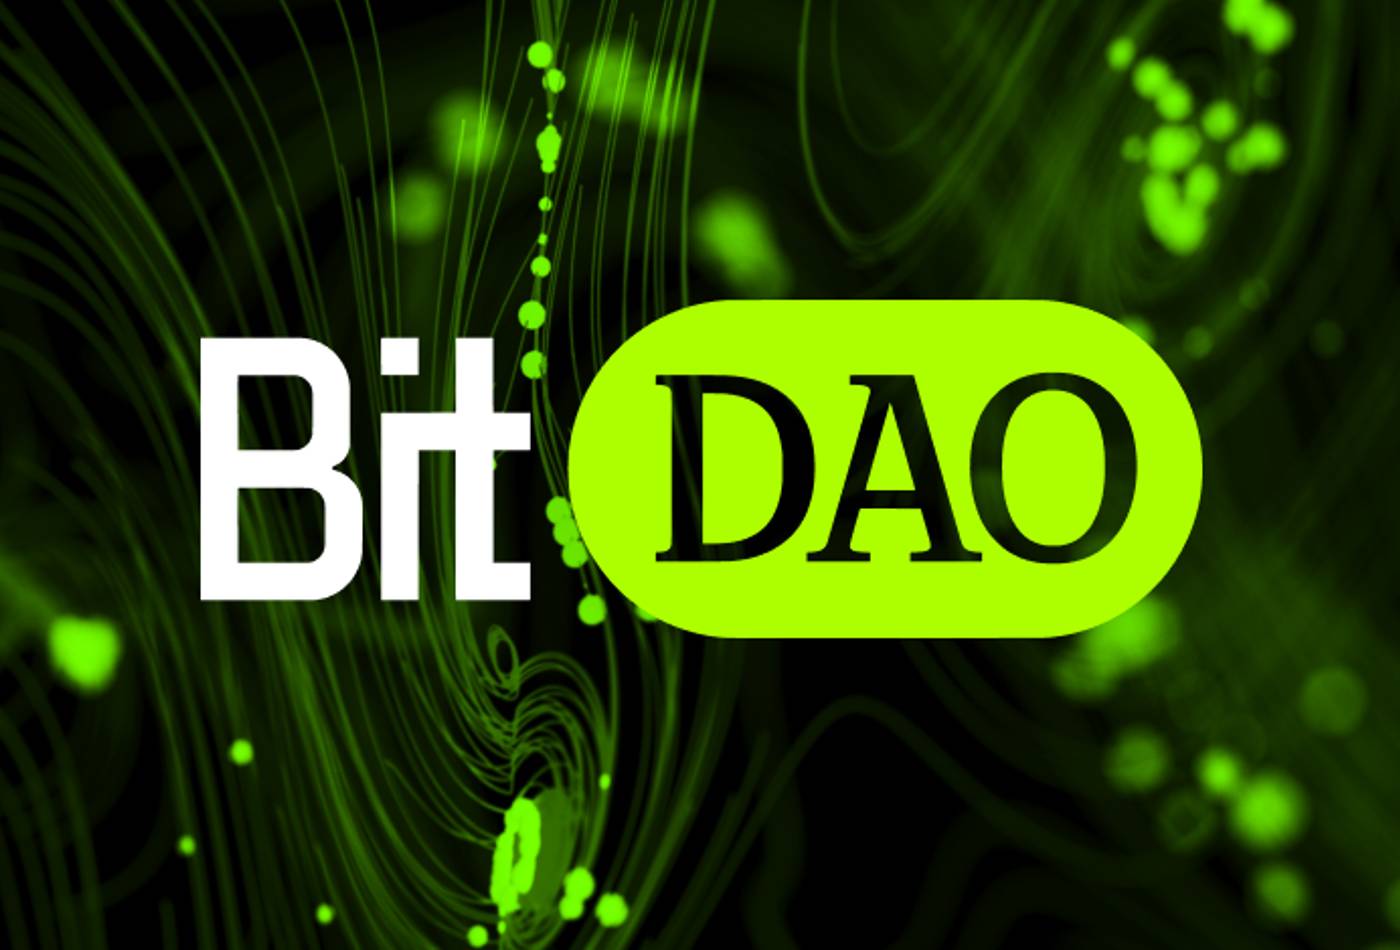 BitDAO (BIT) Price Prediction 2022-2030: The Best Time To Buy